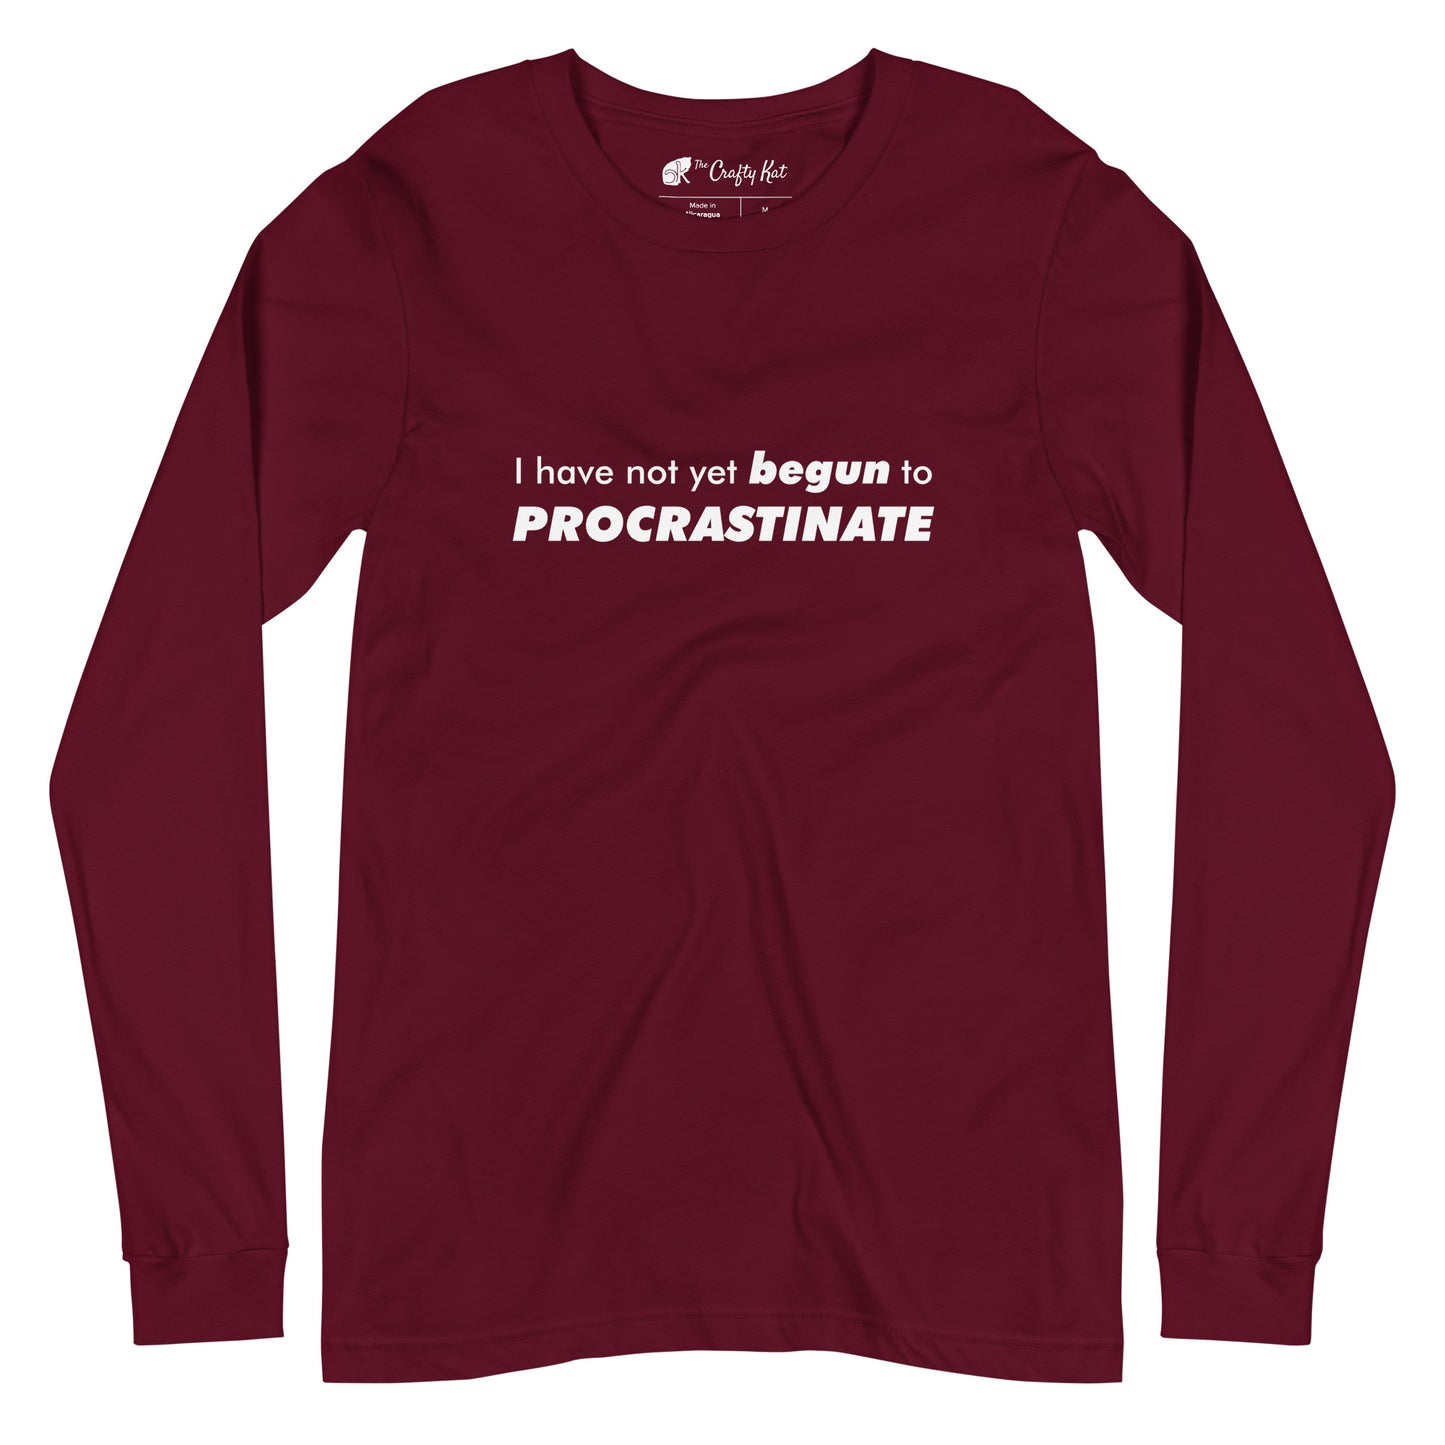 Maroon long-sleeve shirt with text graphic: "I have not yet BEGUN to PROCRASTINATE"